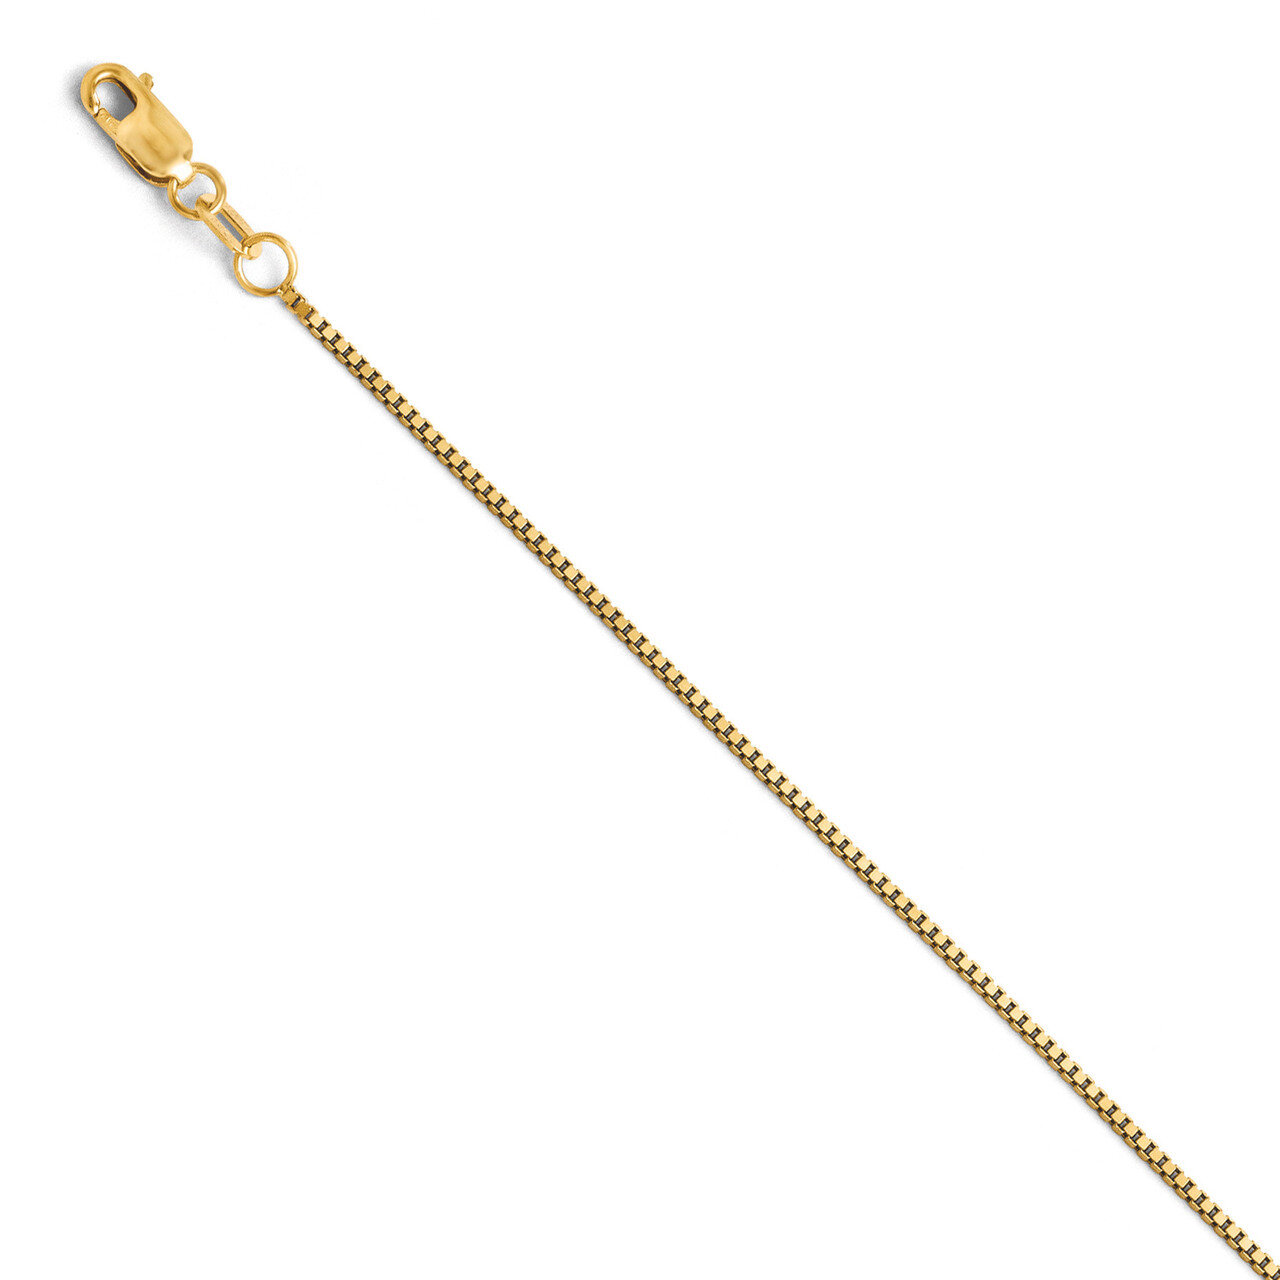 Box with Lobster Chain 16 Inch - 14k Gold HB-1556-16